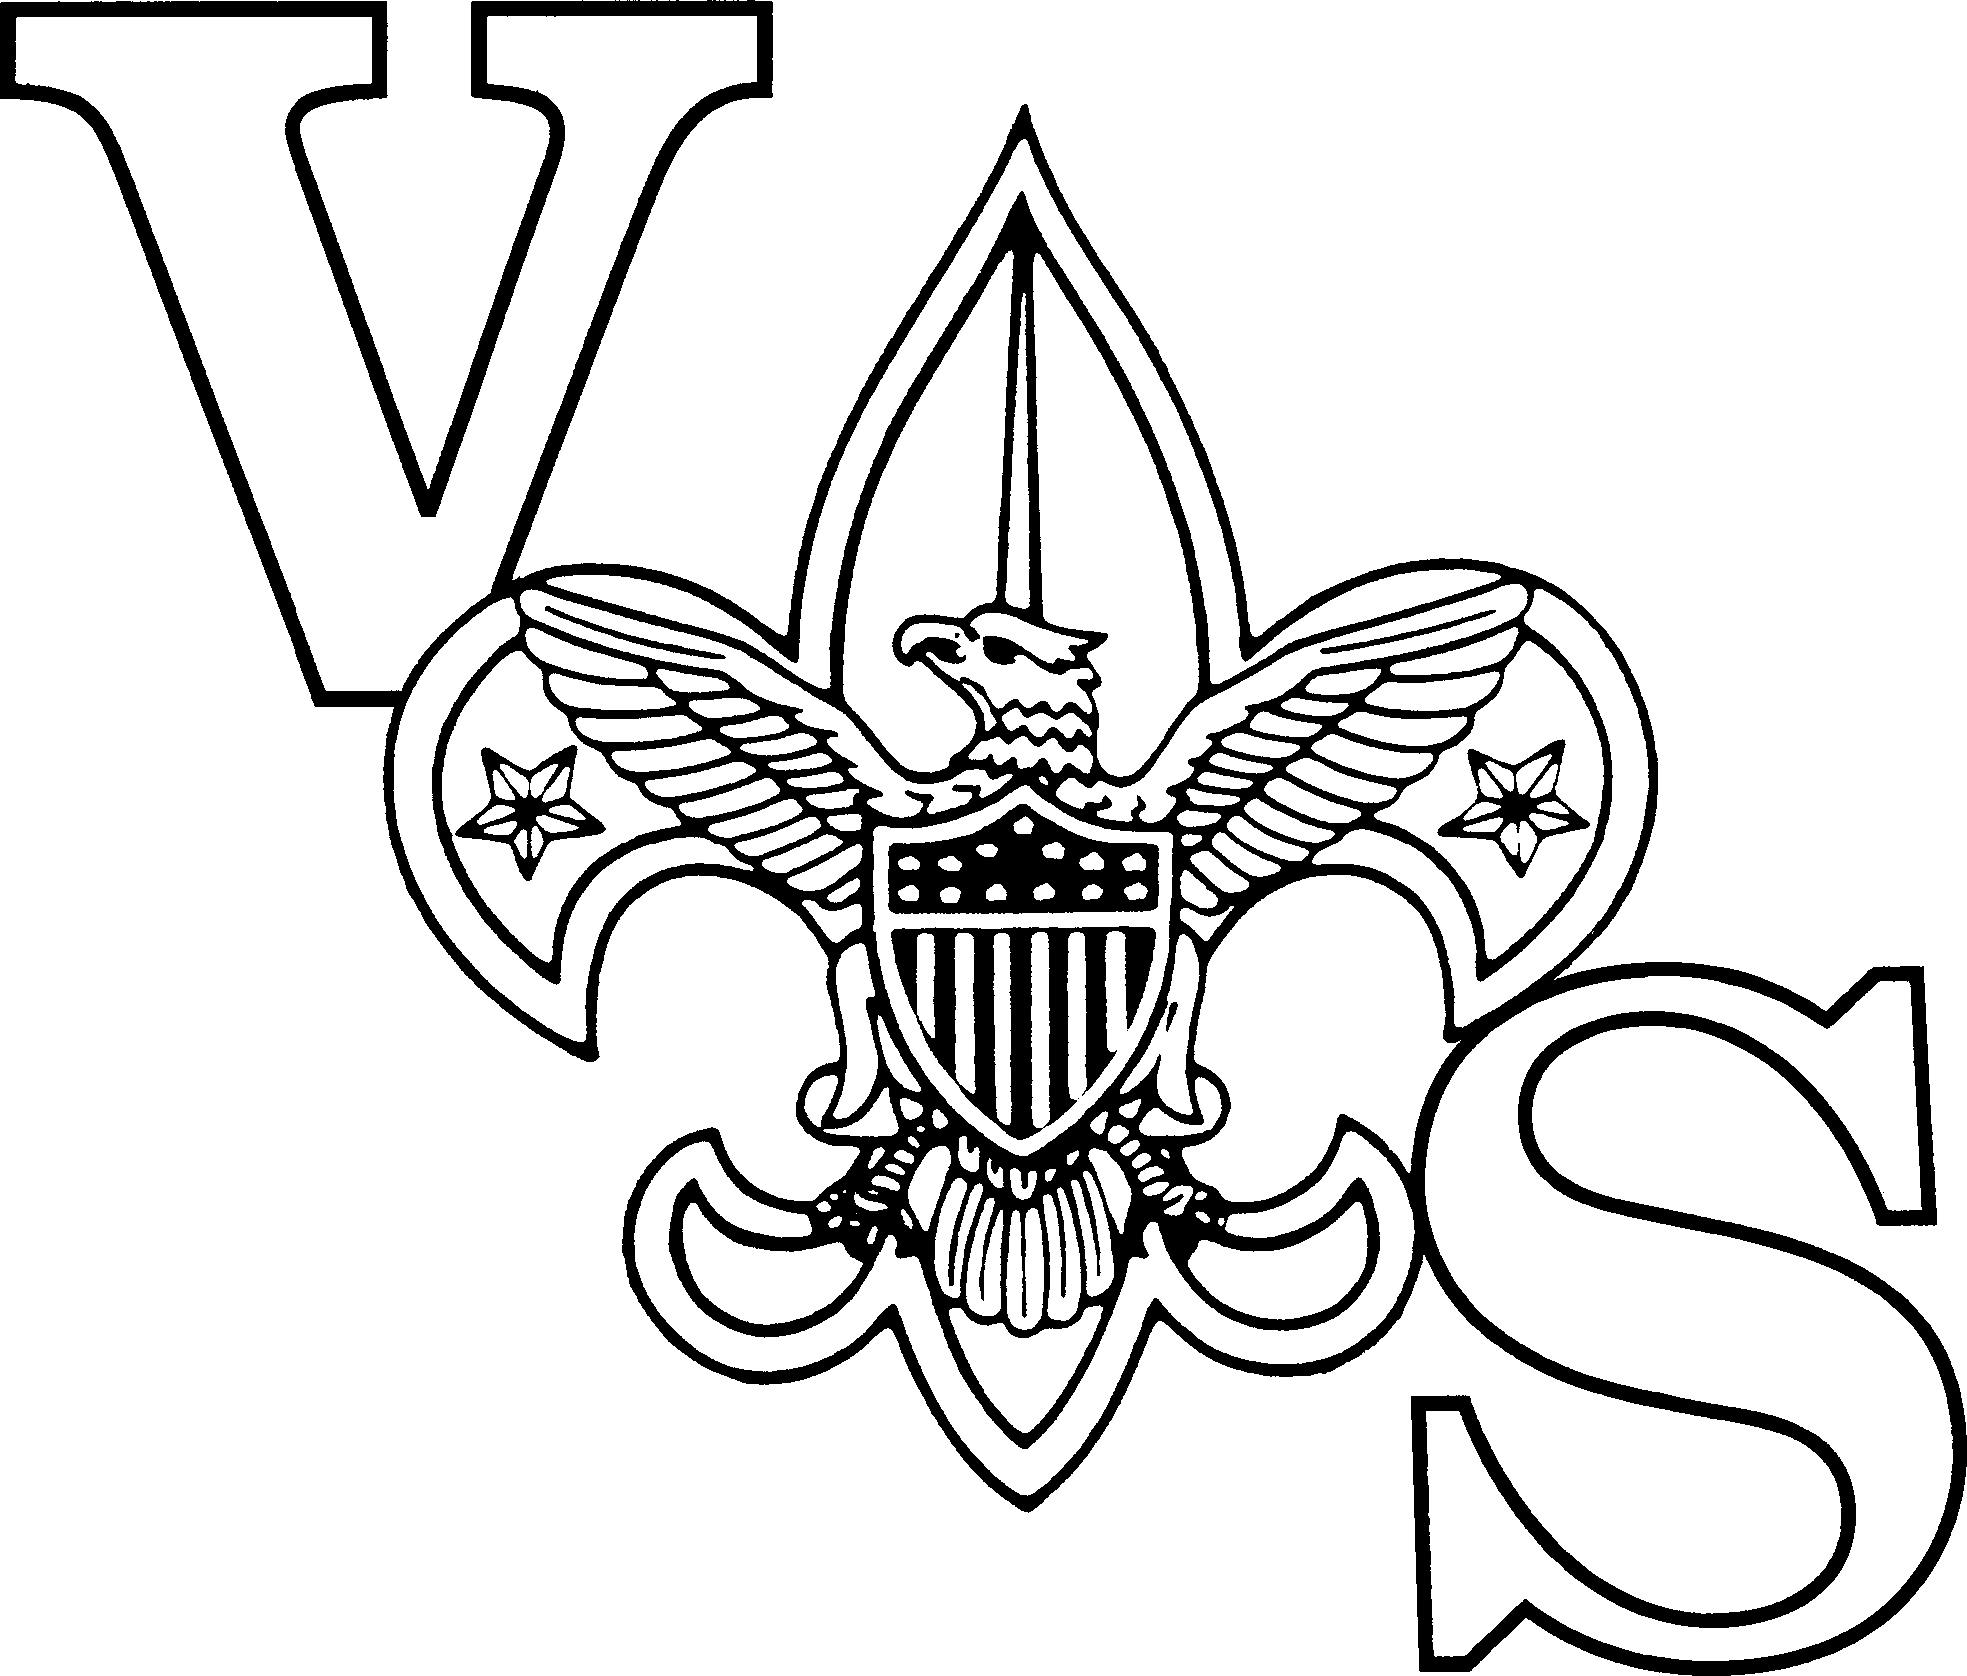 clipart usscouts org library - photo #20